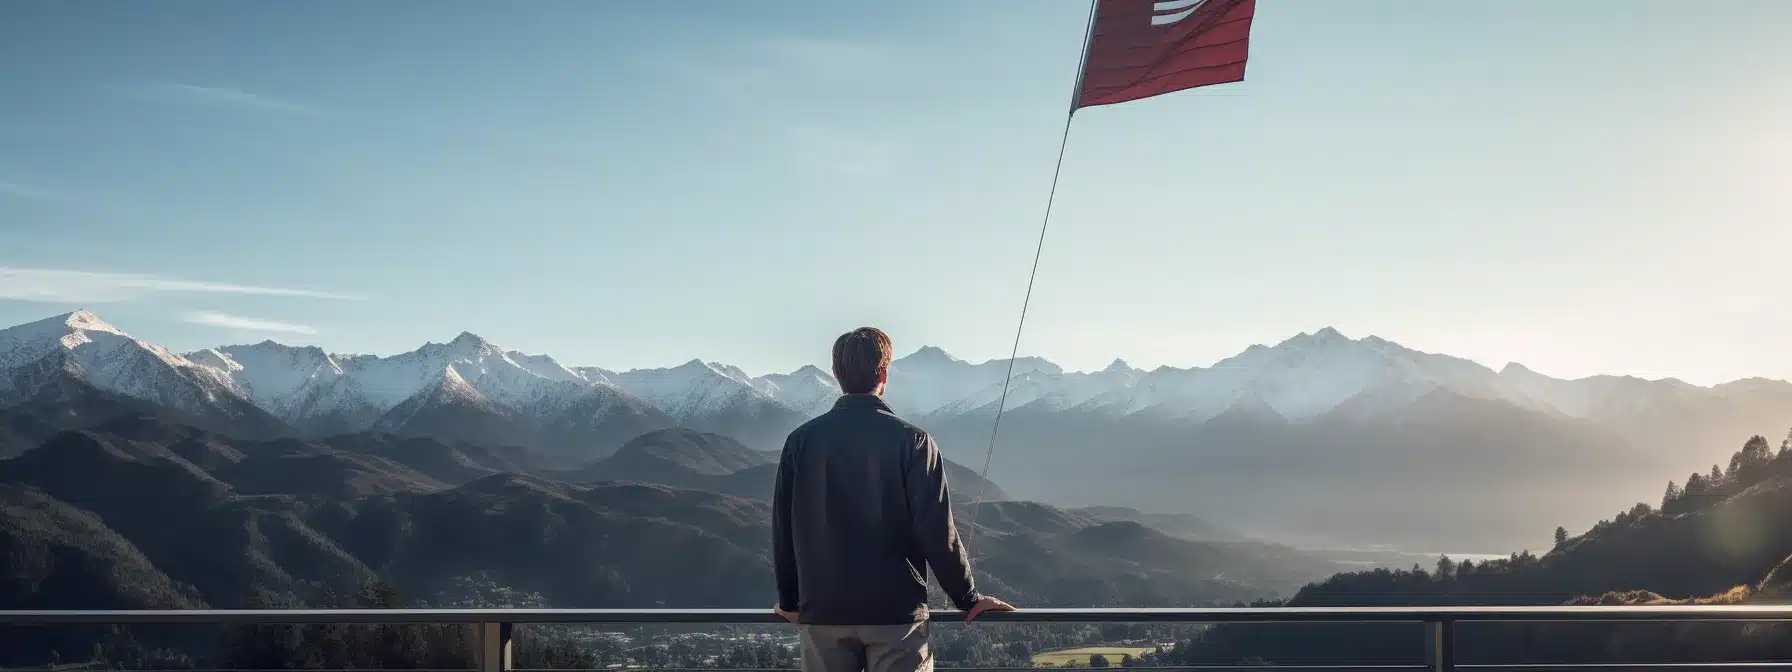 A Person Standing On A Balcony, Looking Into The Distance With A Flag Planted On A Distant Mountain Peak.